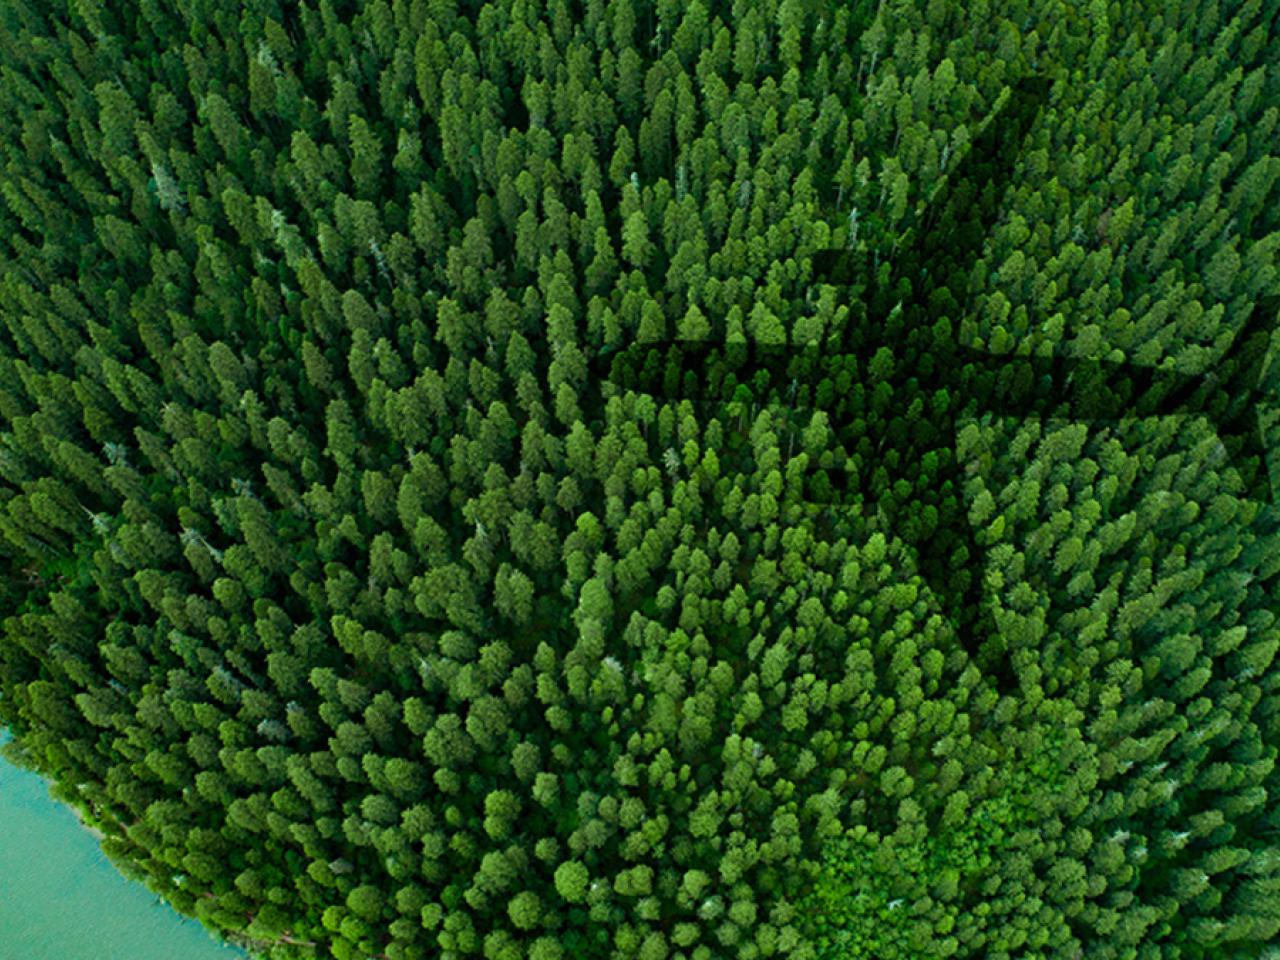 The shadow of a plane above a forested area.